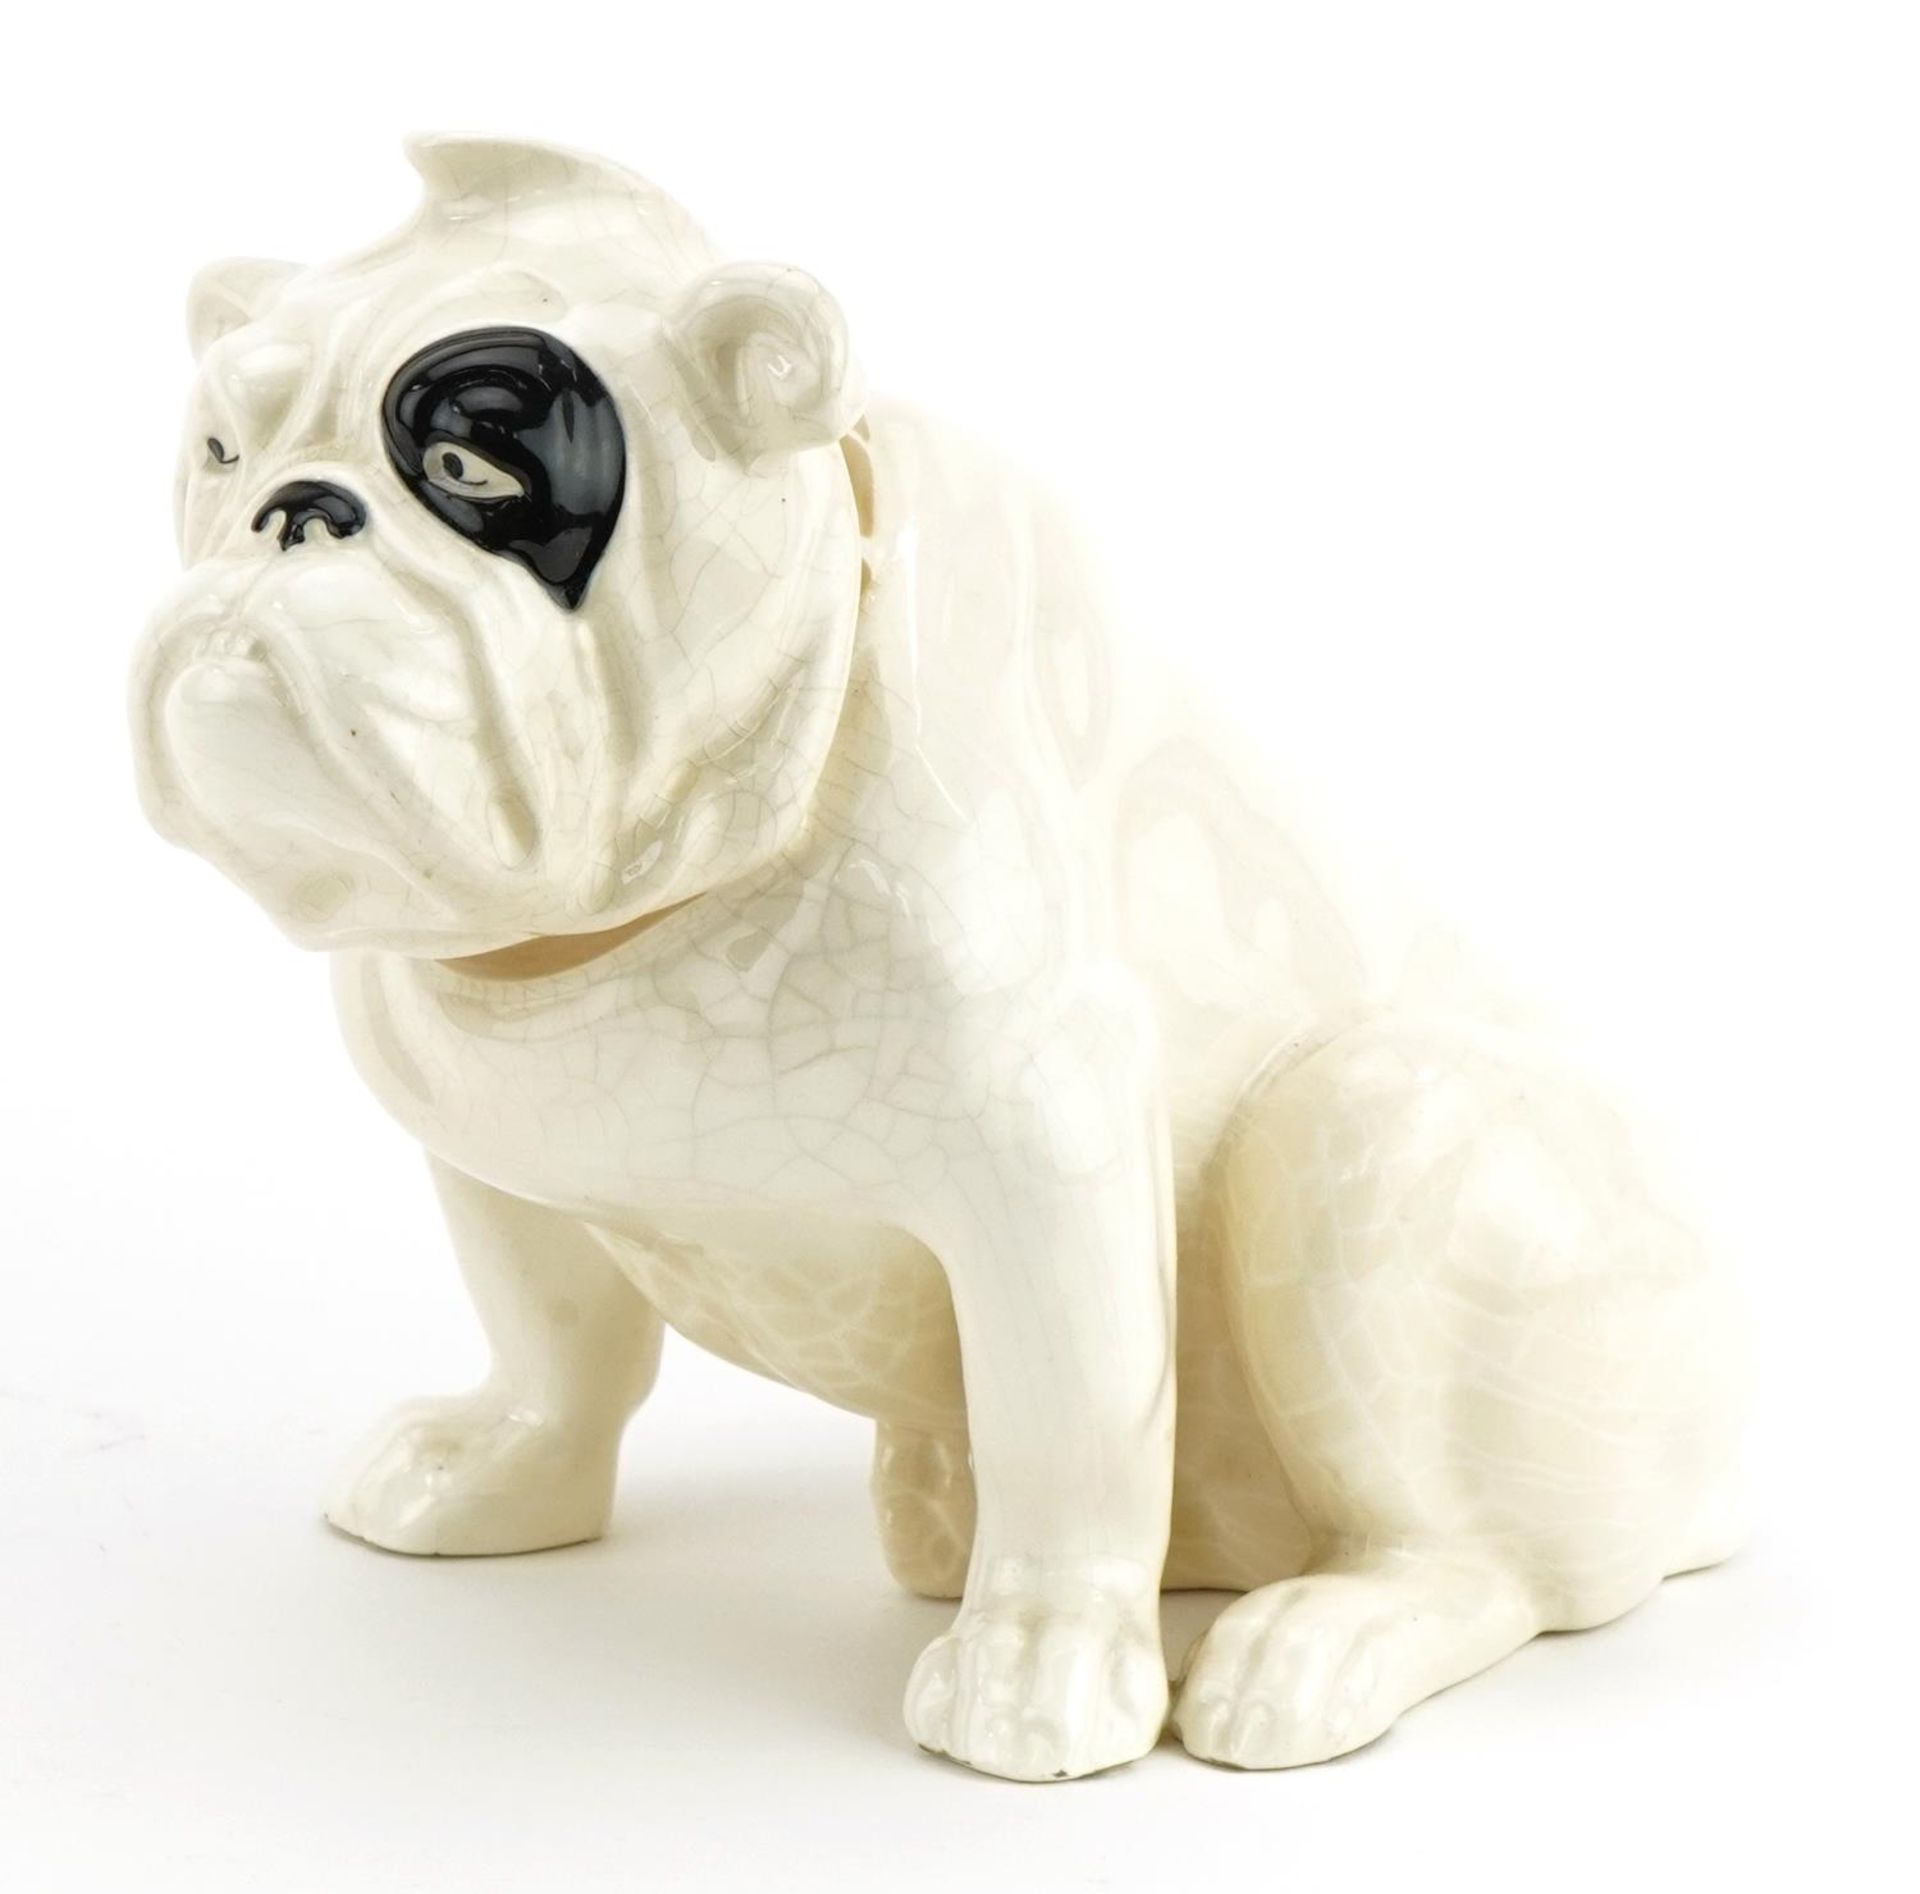 Bols crackle glaze pottery decanter in the form of a Bulldog, 22cm in length